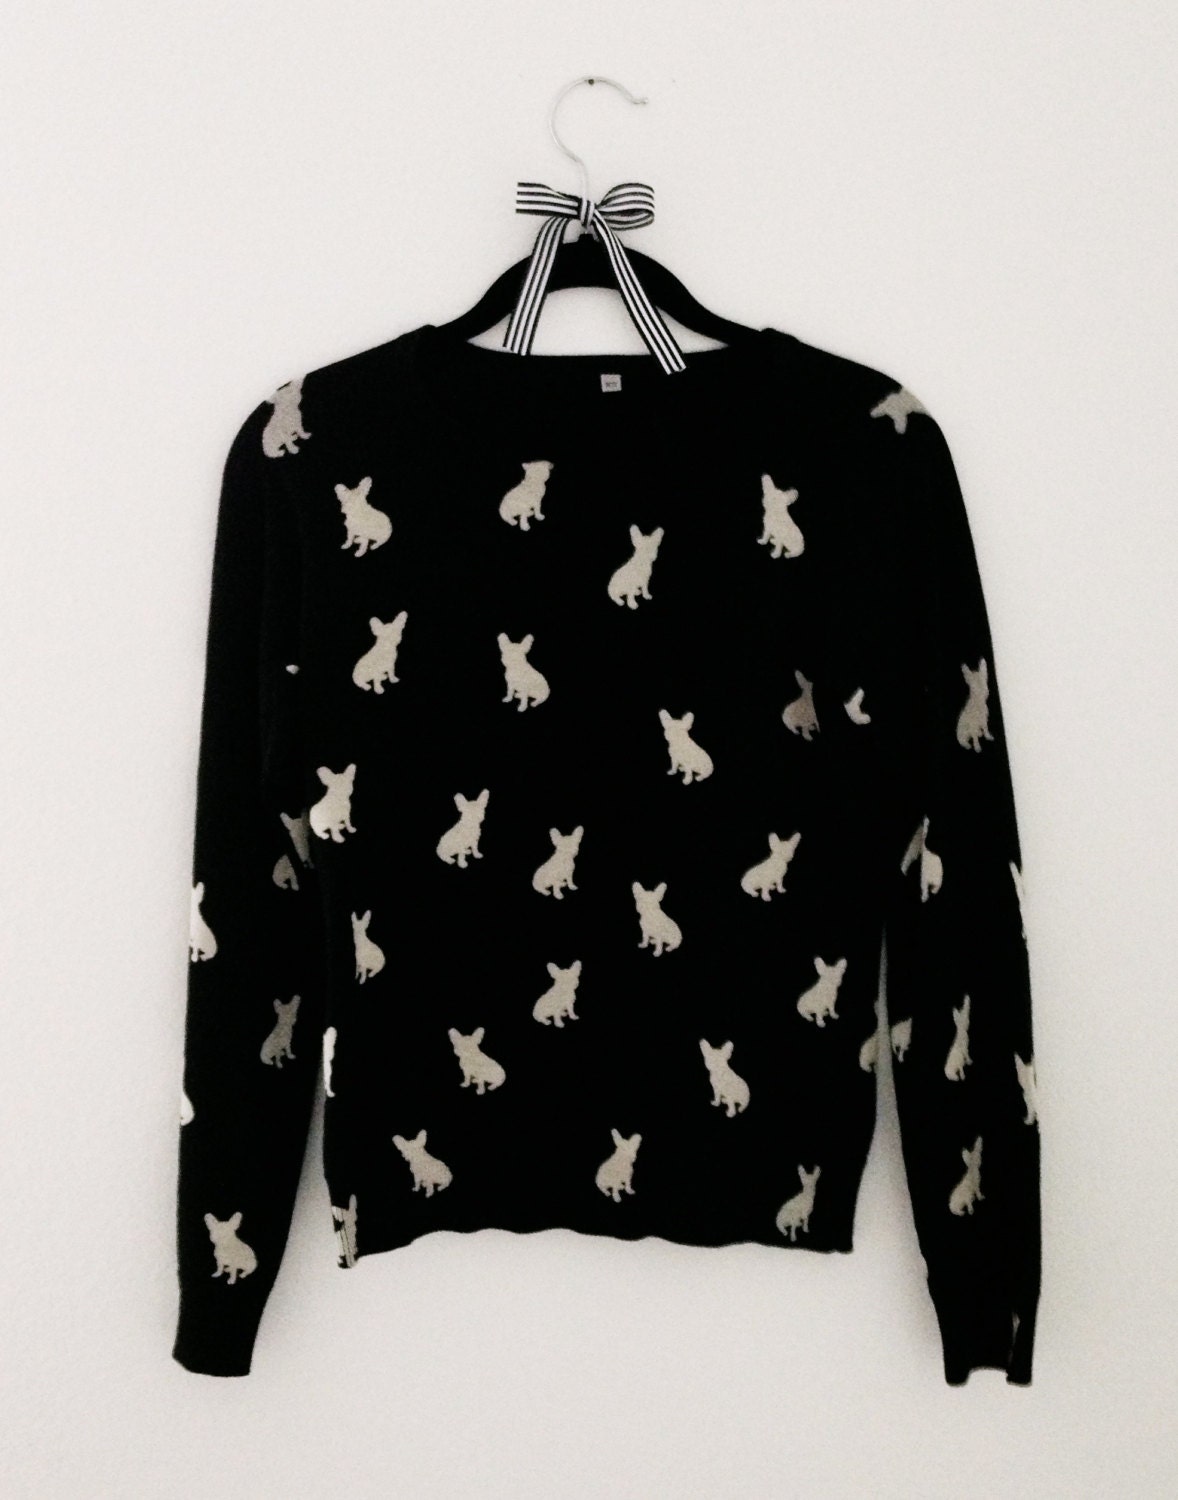 French Bulldog Sweater Black with White Frenchies by pipolli